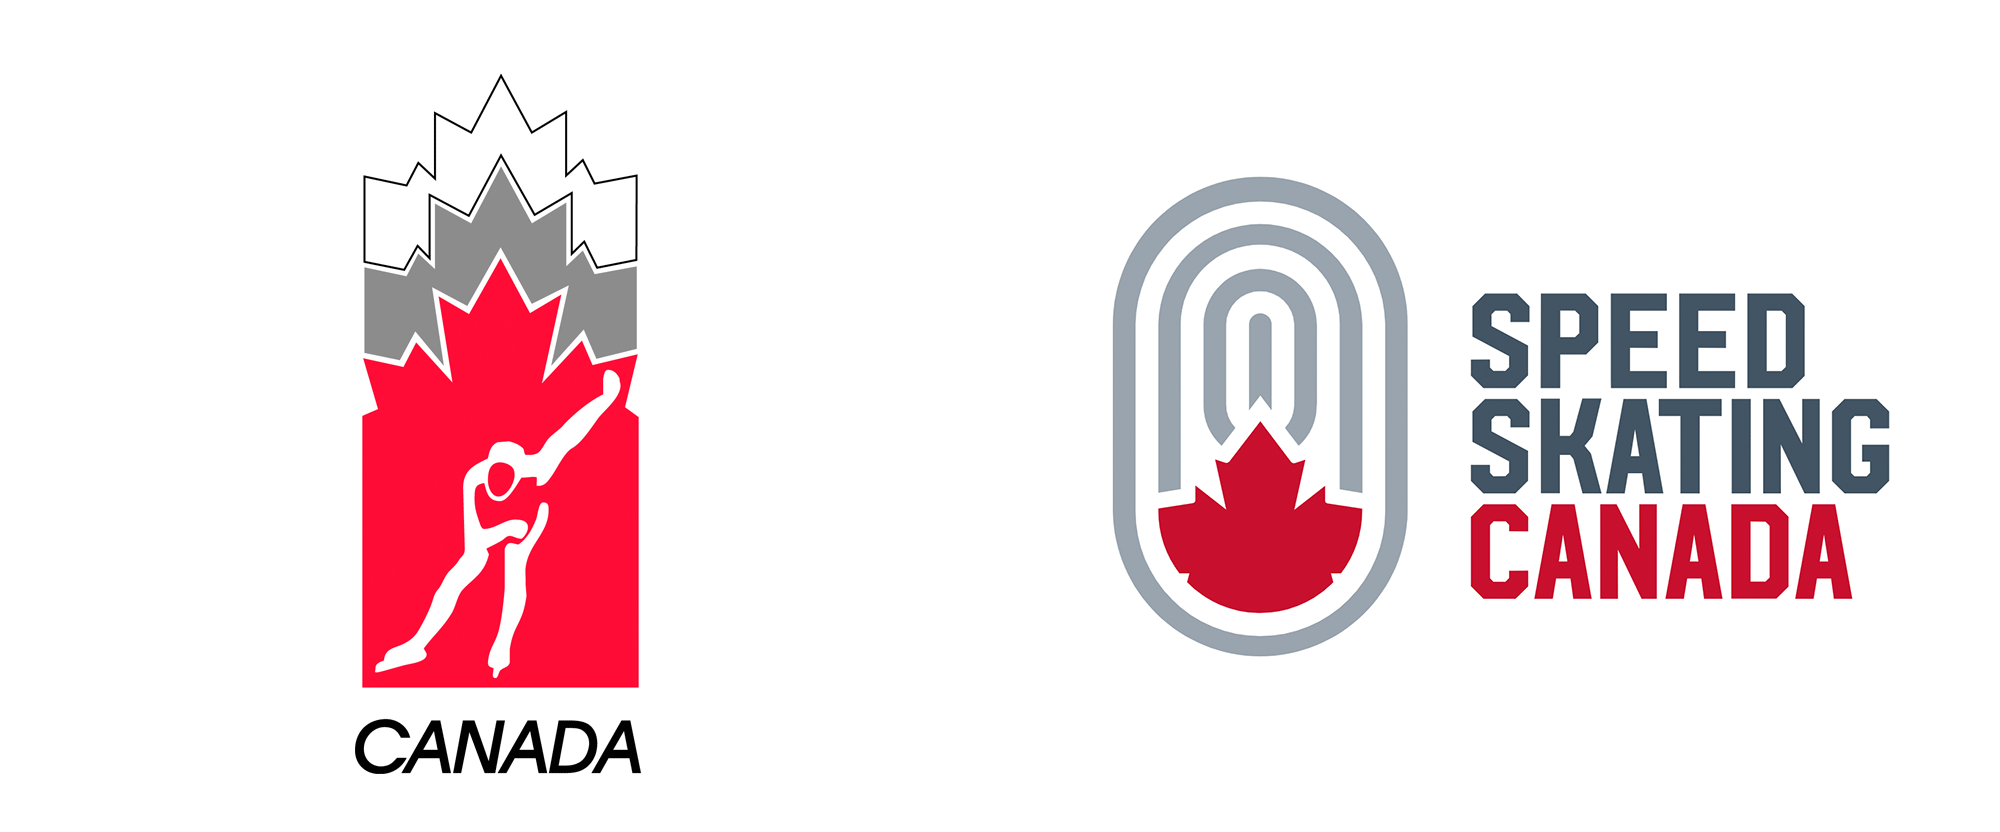 New Logo and Identity for Speed Skating Canada by Will Creative Inc.